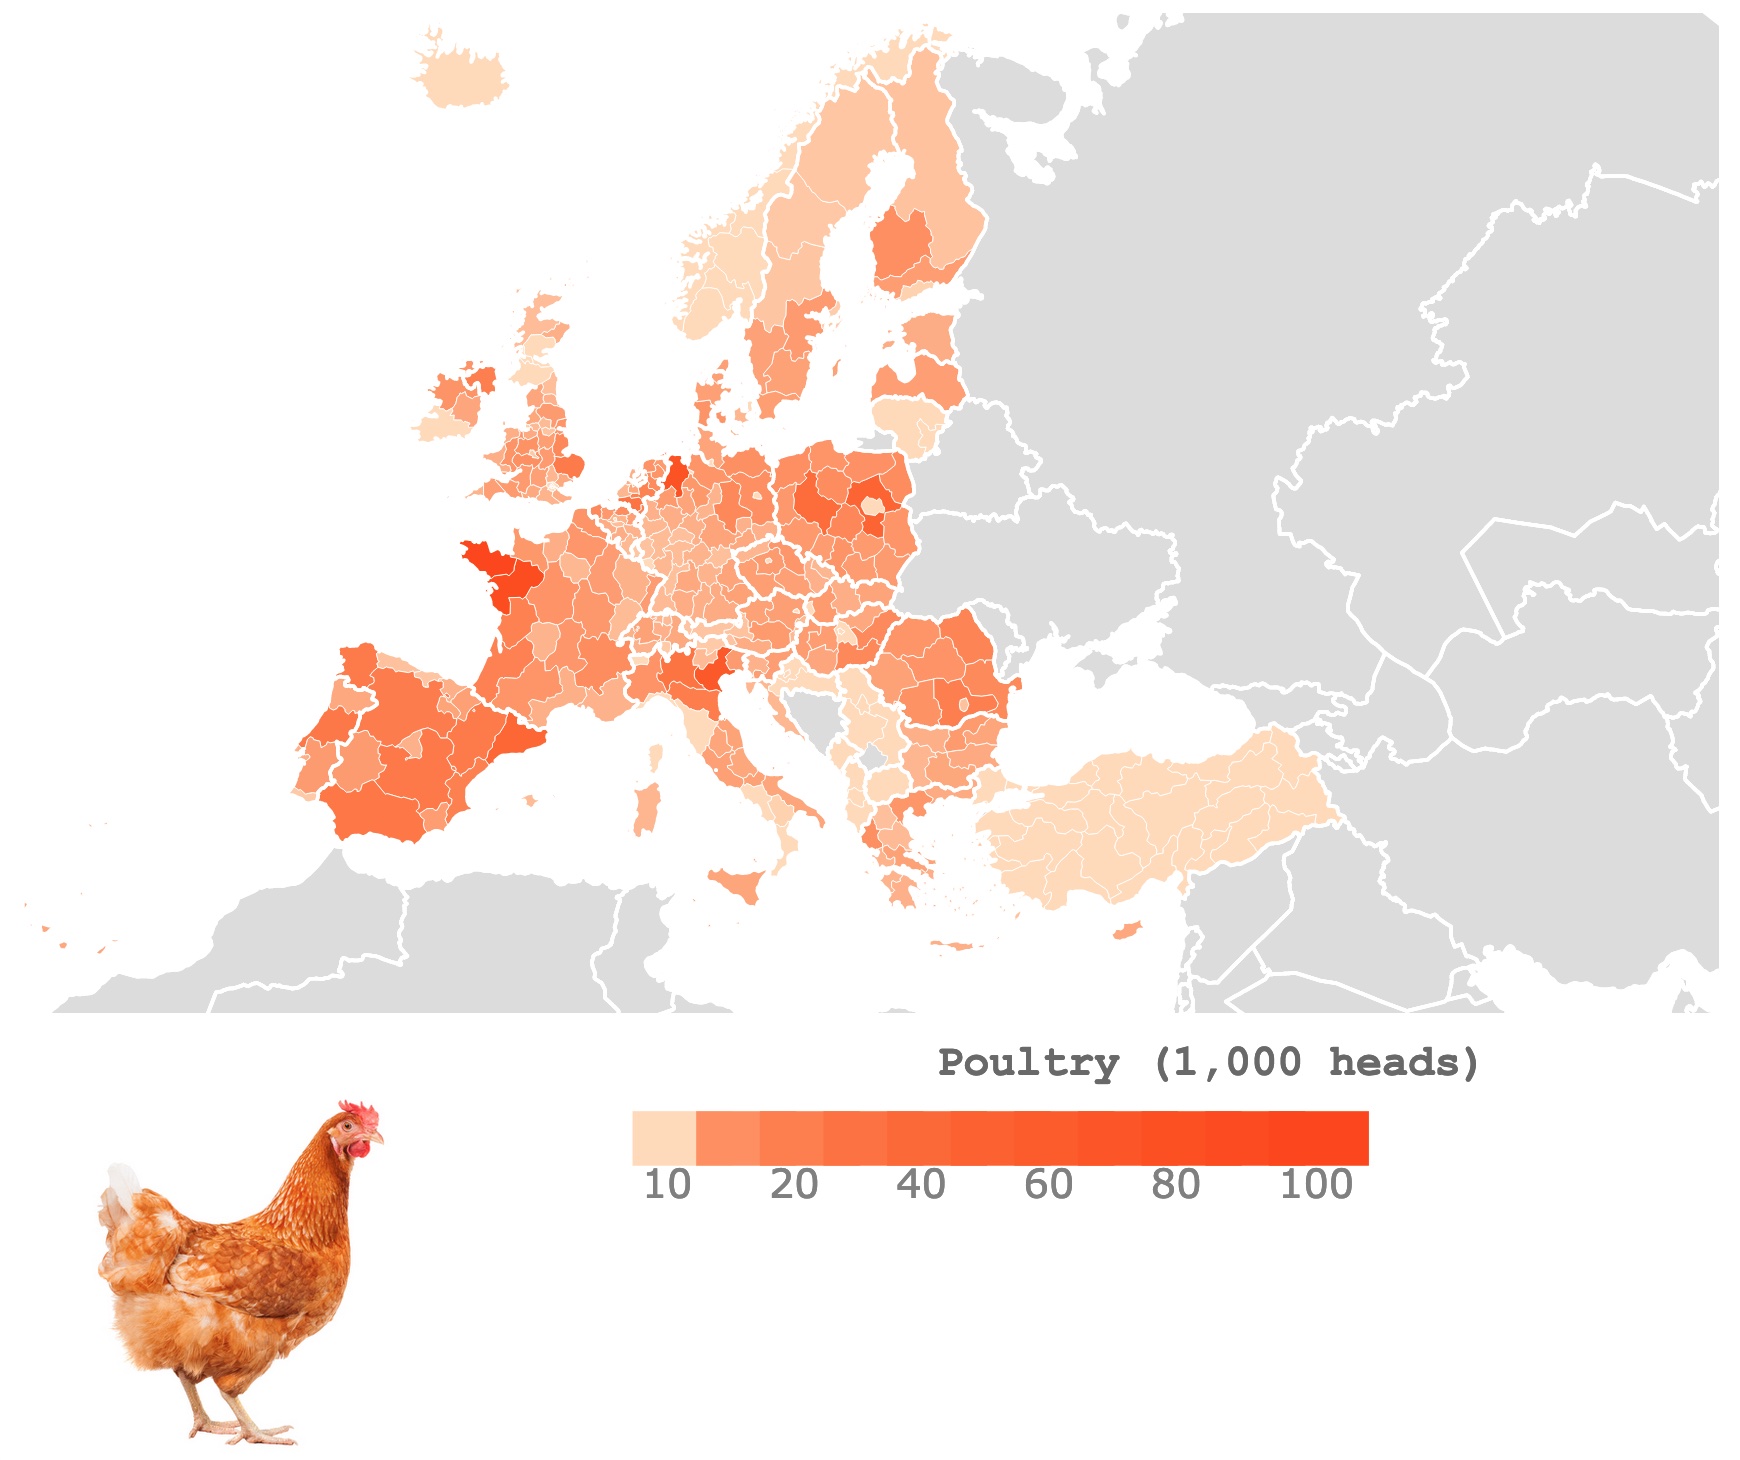 Map of poultry in Europe